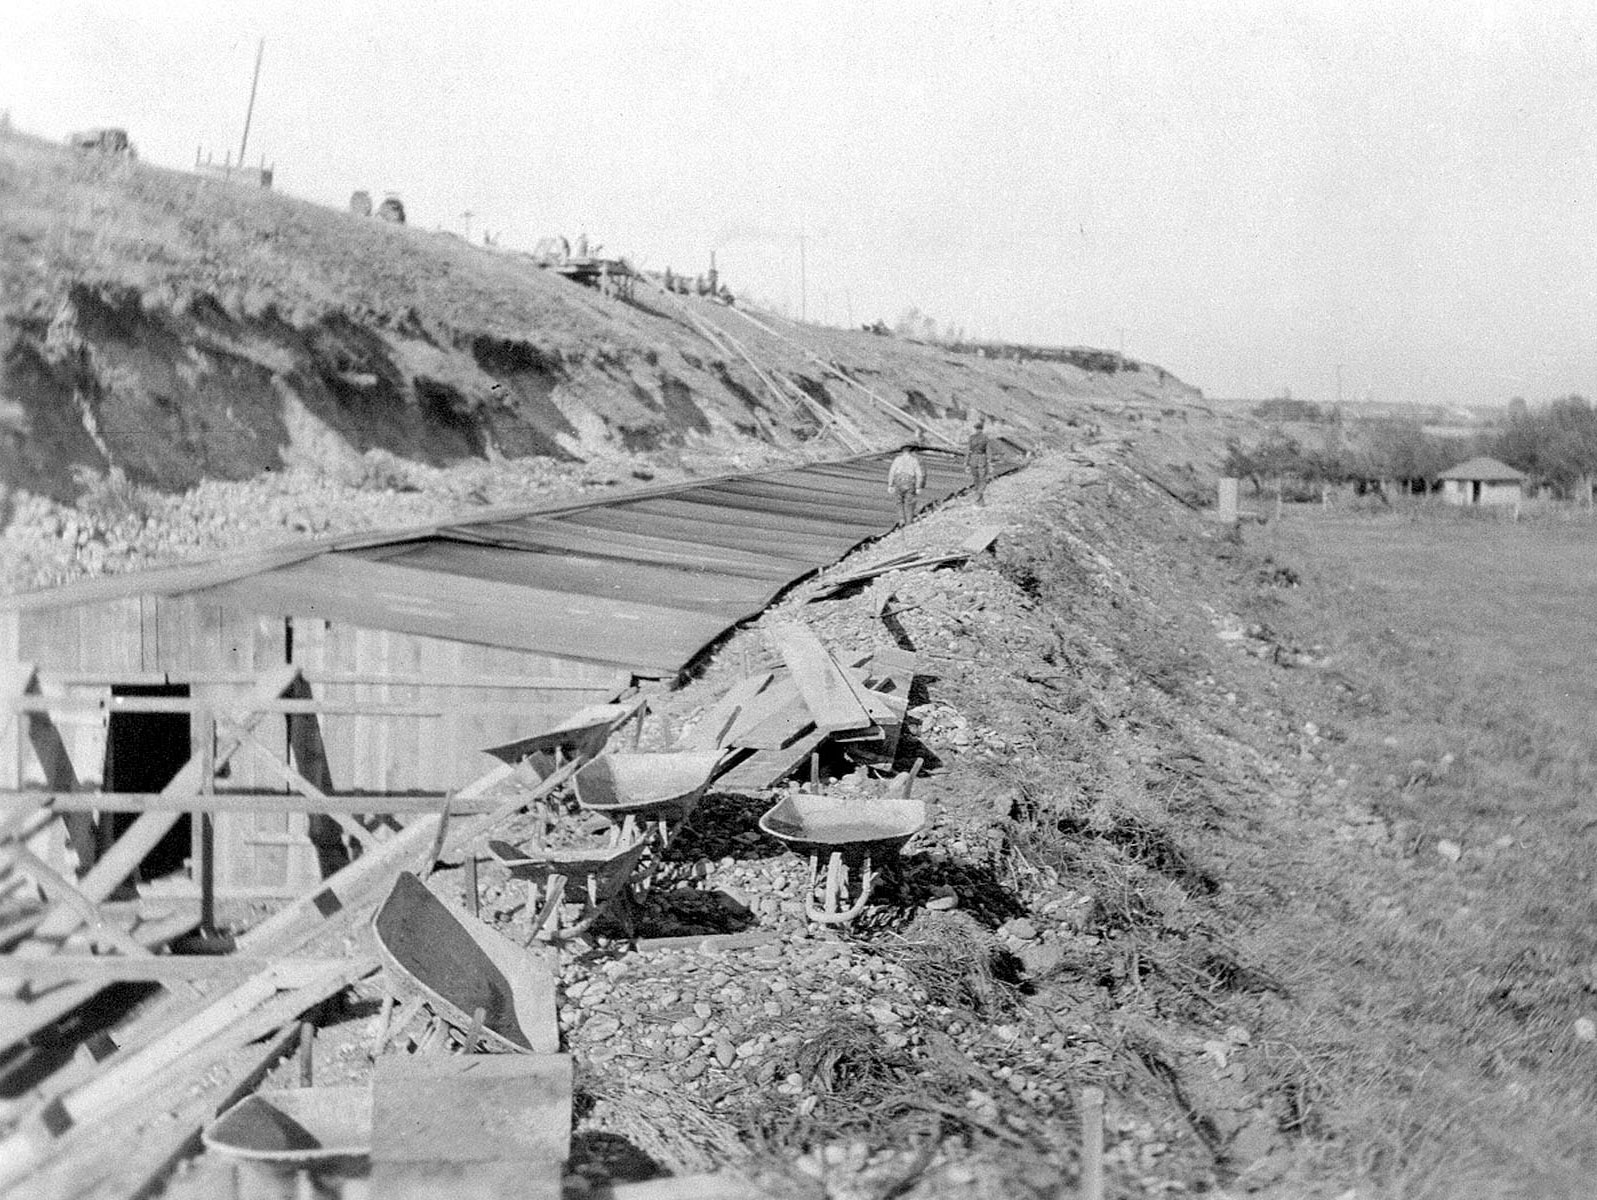 Initial work and framing for the New York (Main) Canal near Boise, Idaho. c. 1910